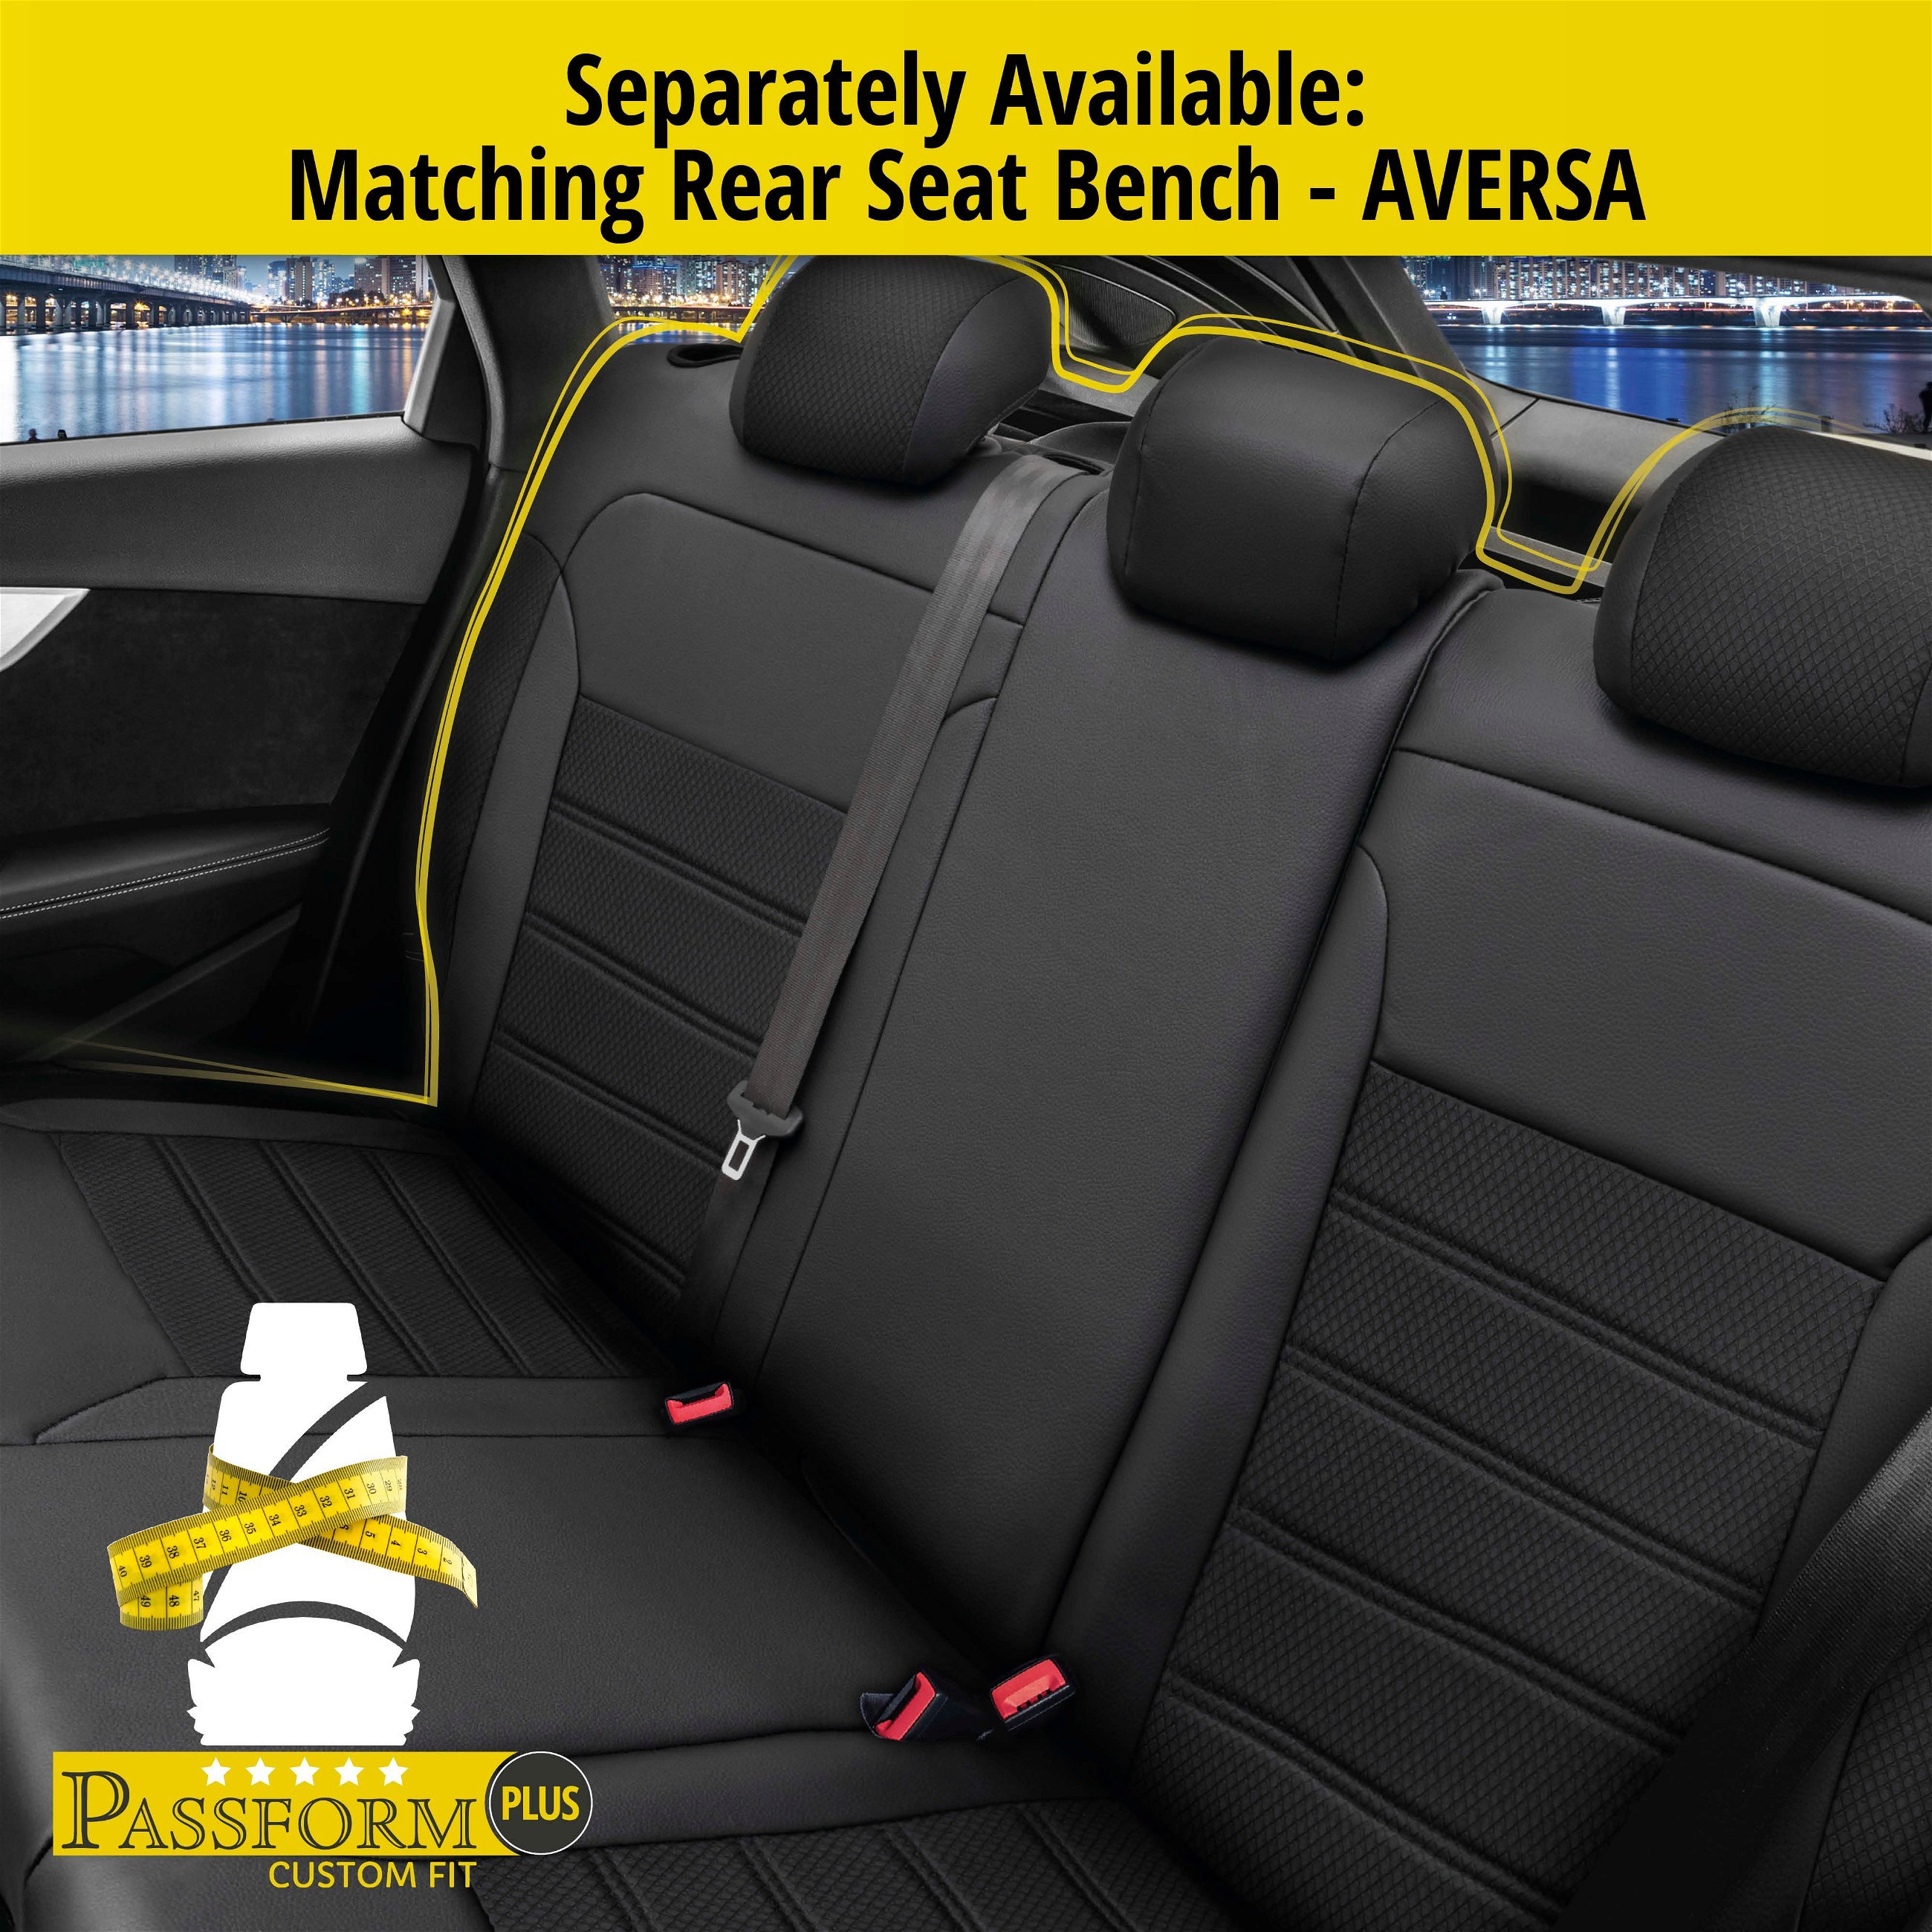 Seat Cover Aversa for Mercedes-Benz E-Class (W124) 02/1993-06/1996, 2 seat covers for normal seats